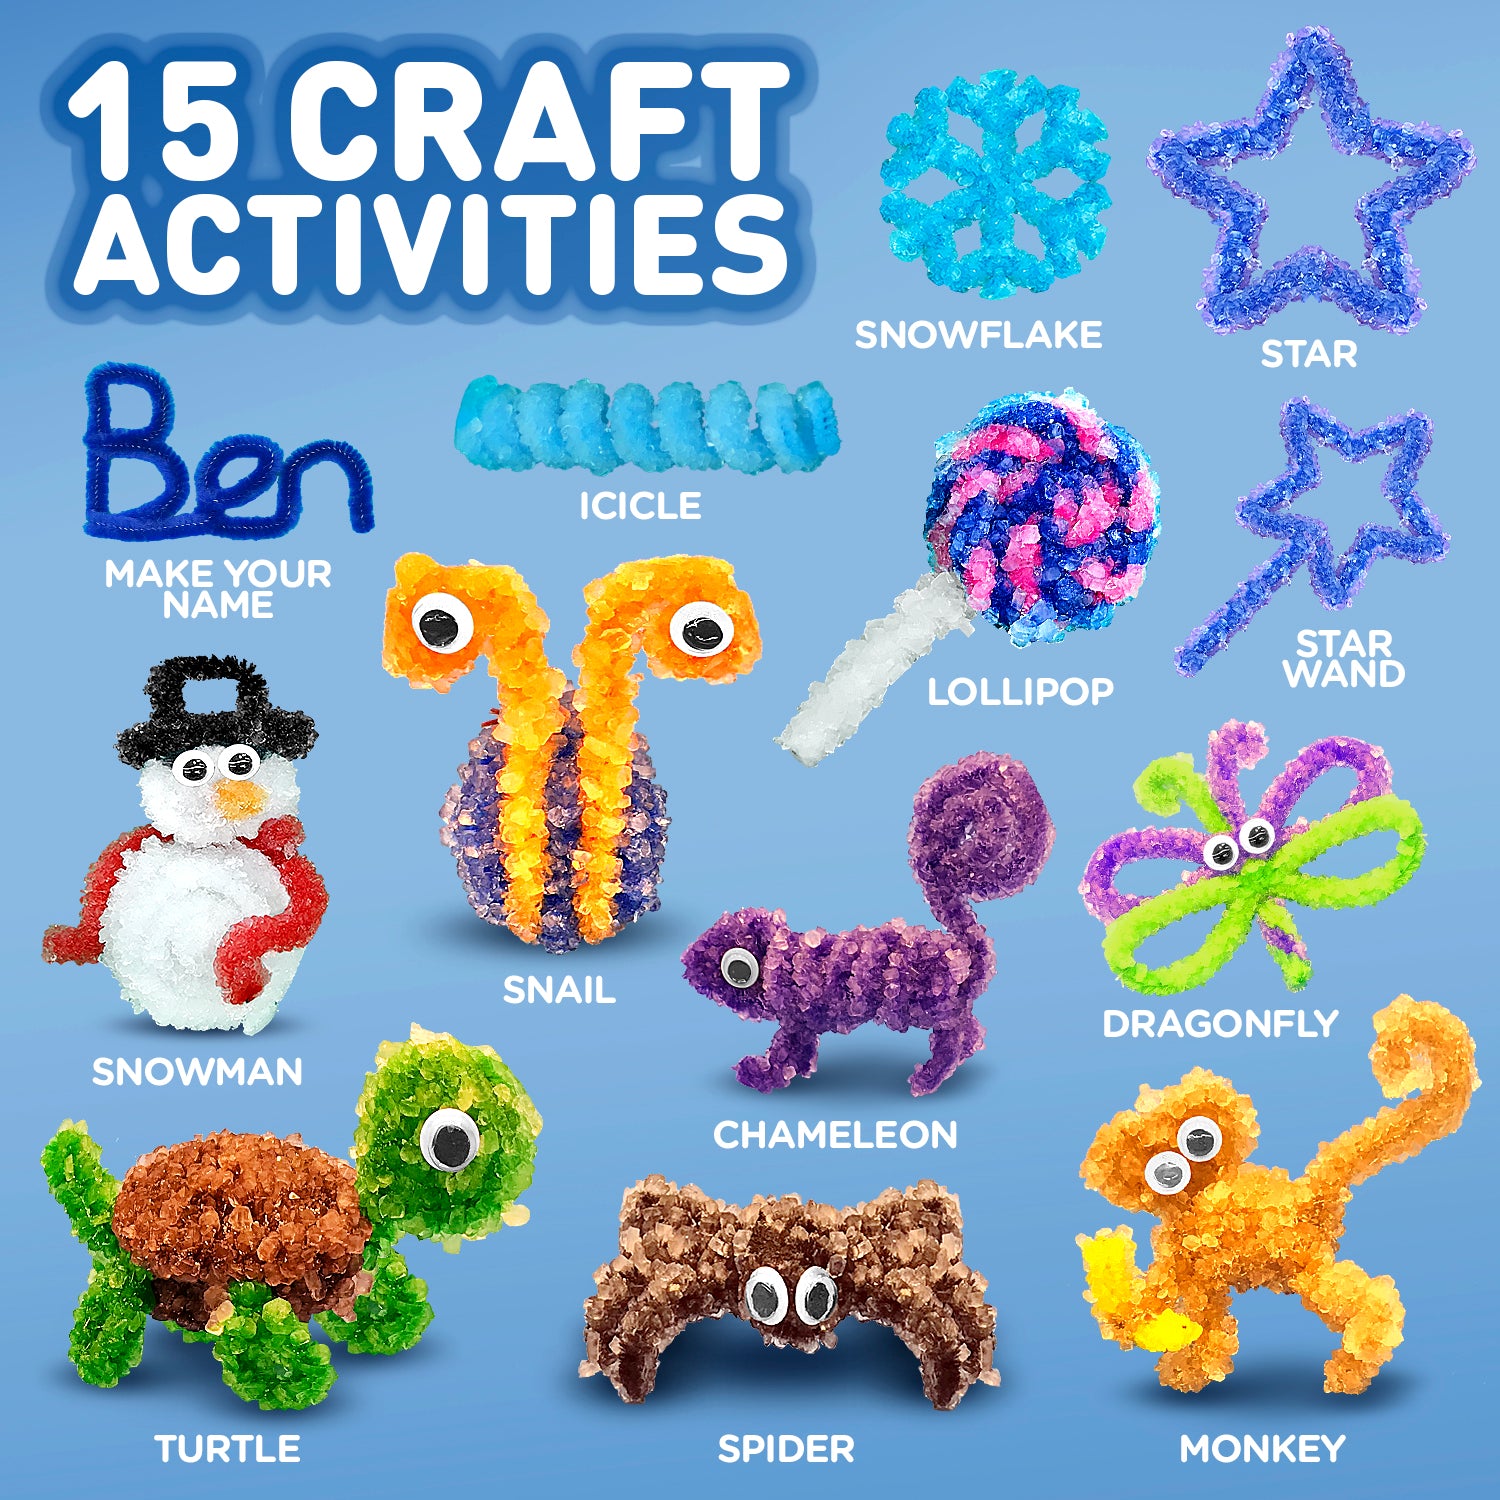 Arts Crafts Kits 8 Year Olds, Arts Crafts Kits 6 Year Olds